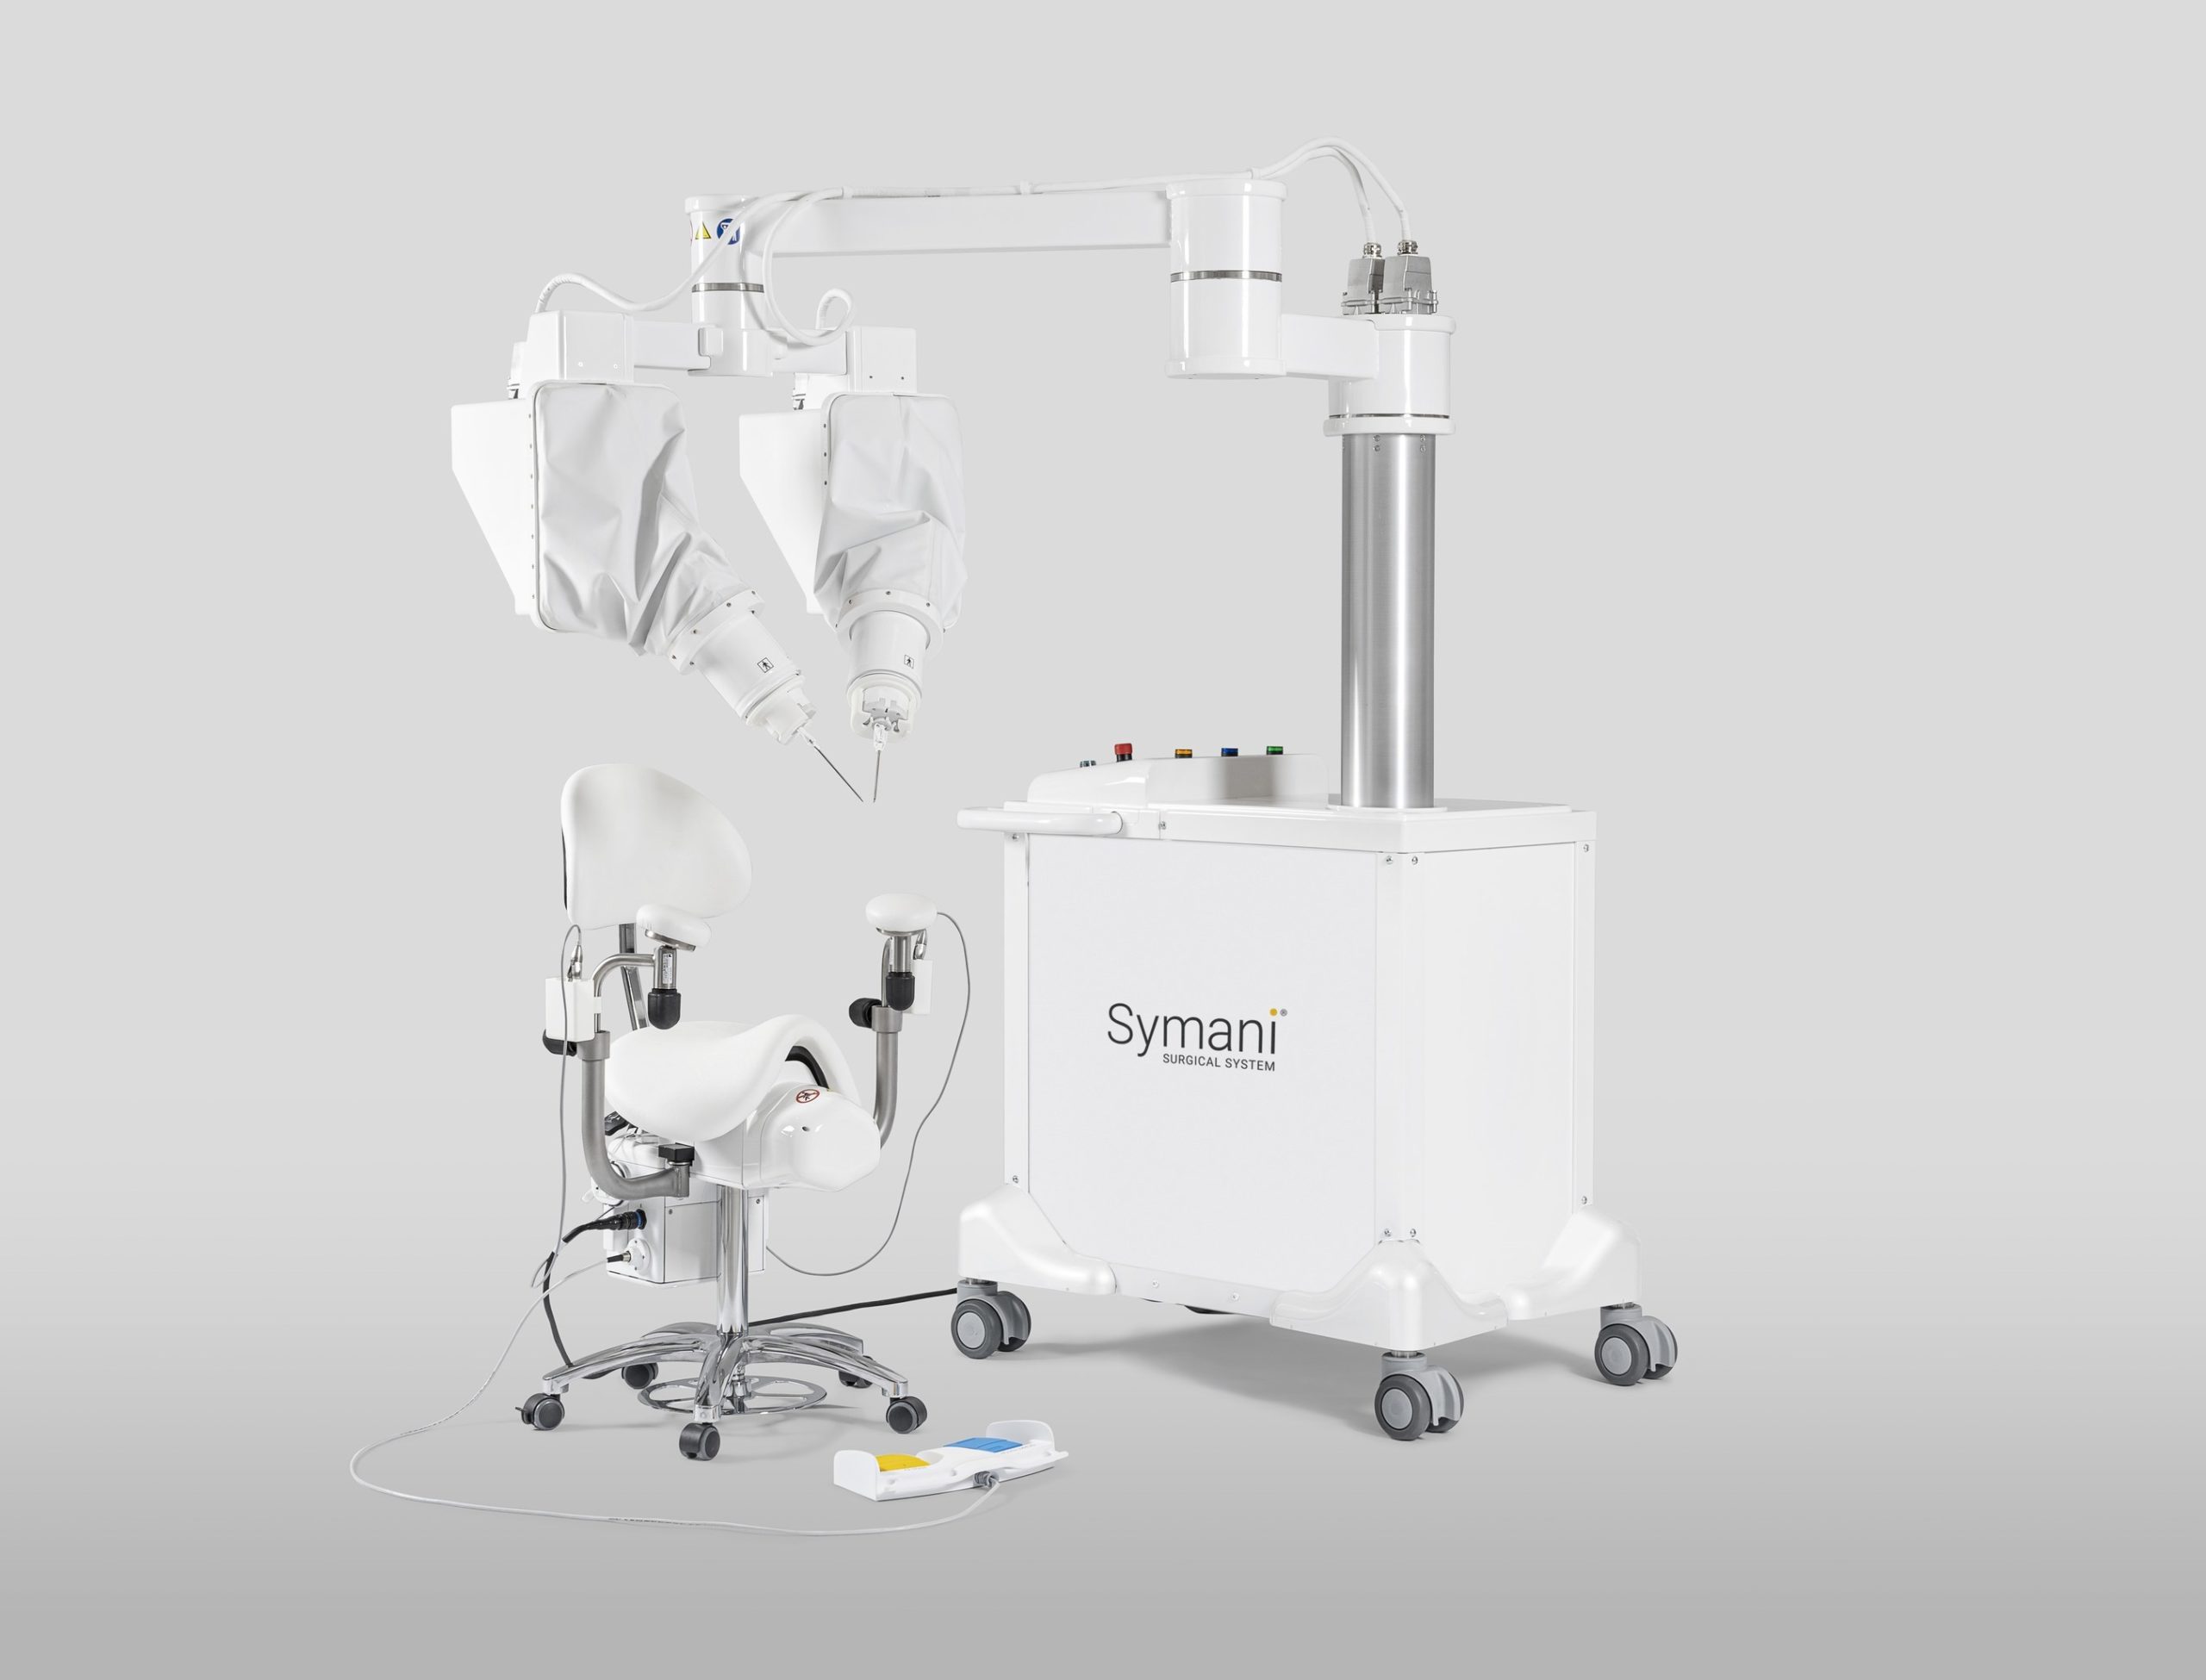 MMI’s Symani® Surgical System for Robotic Microsurgery